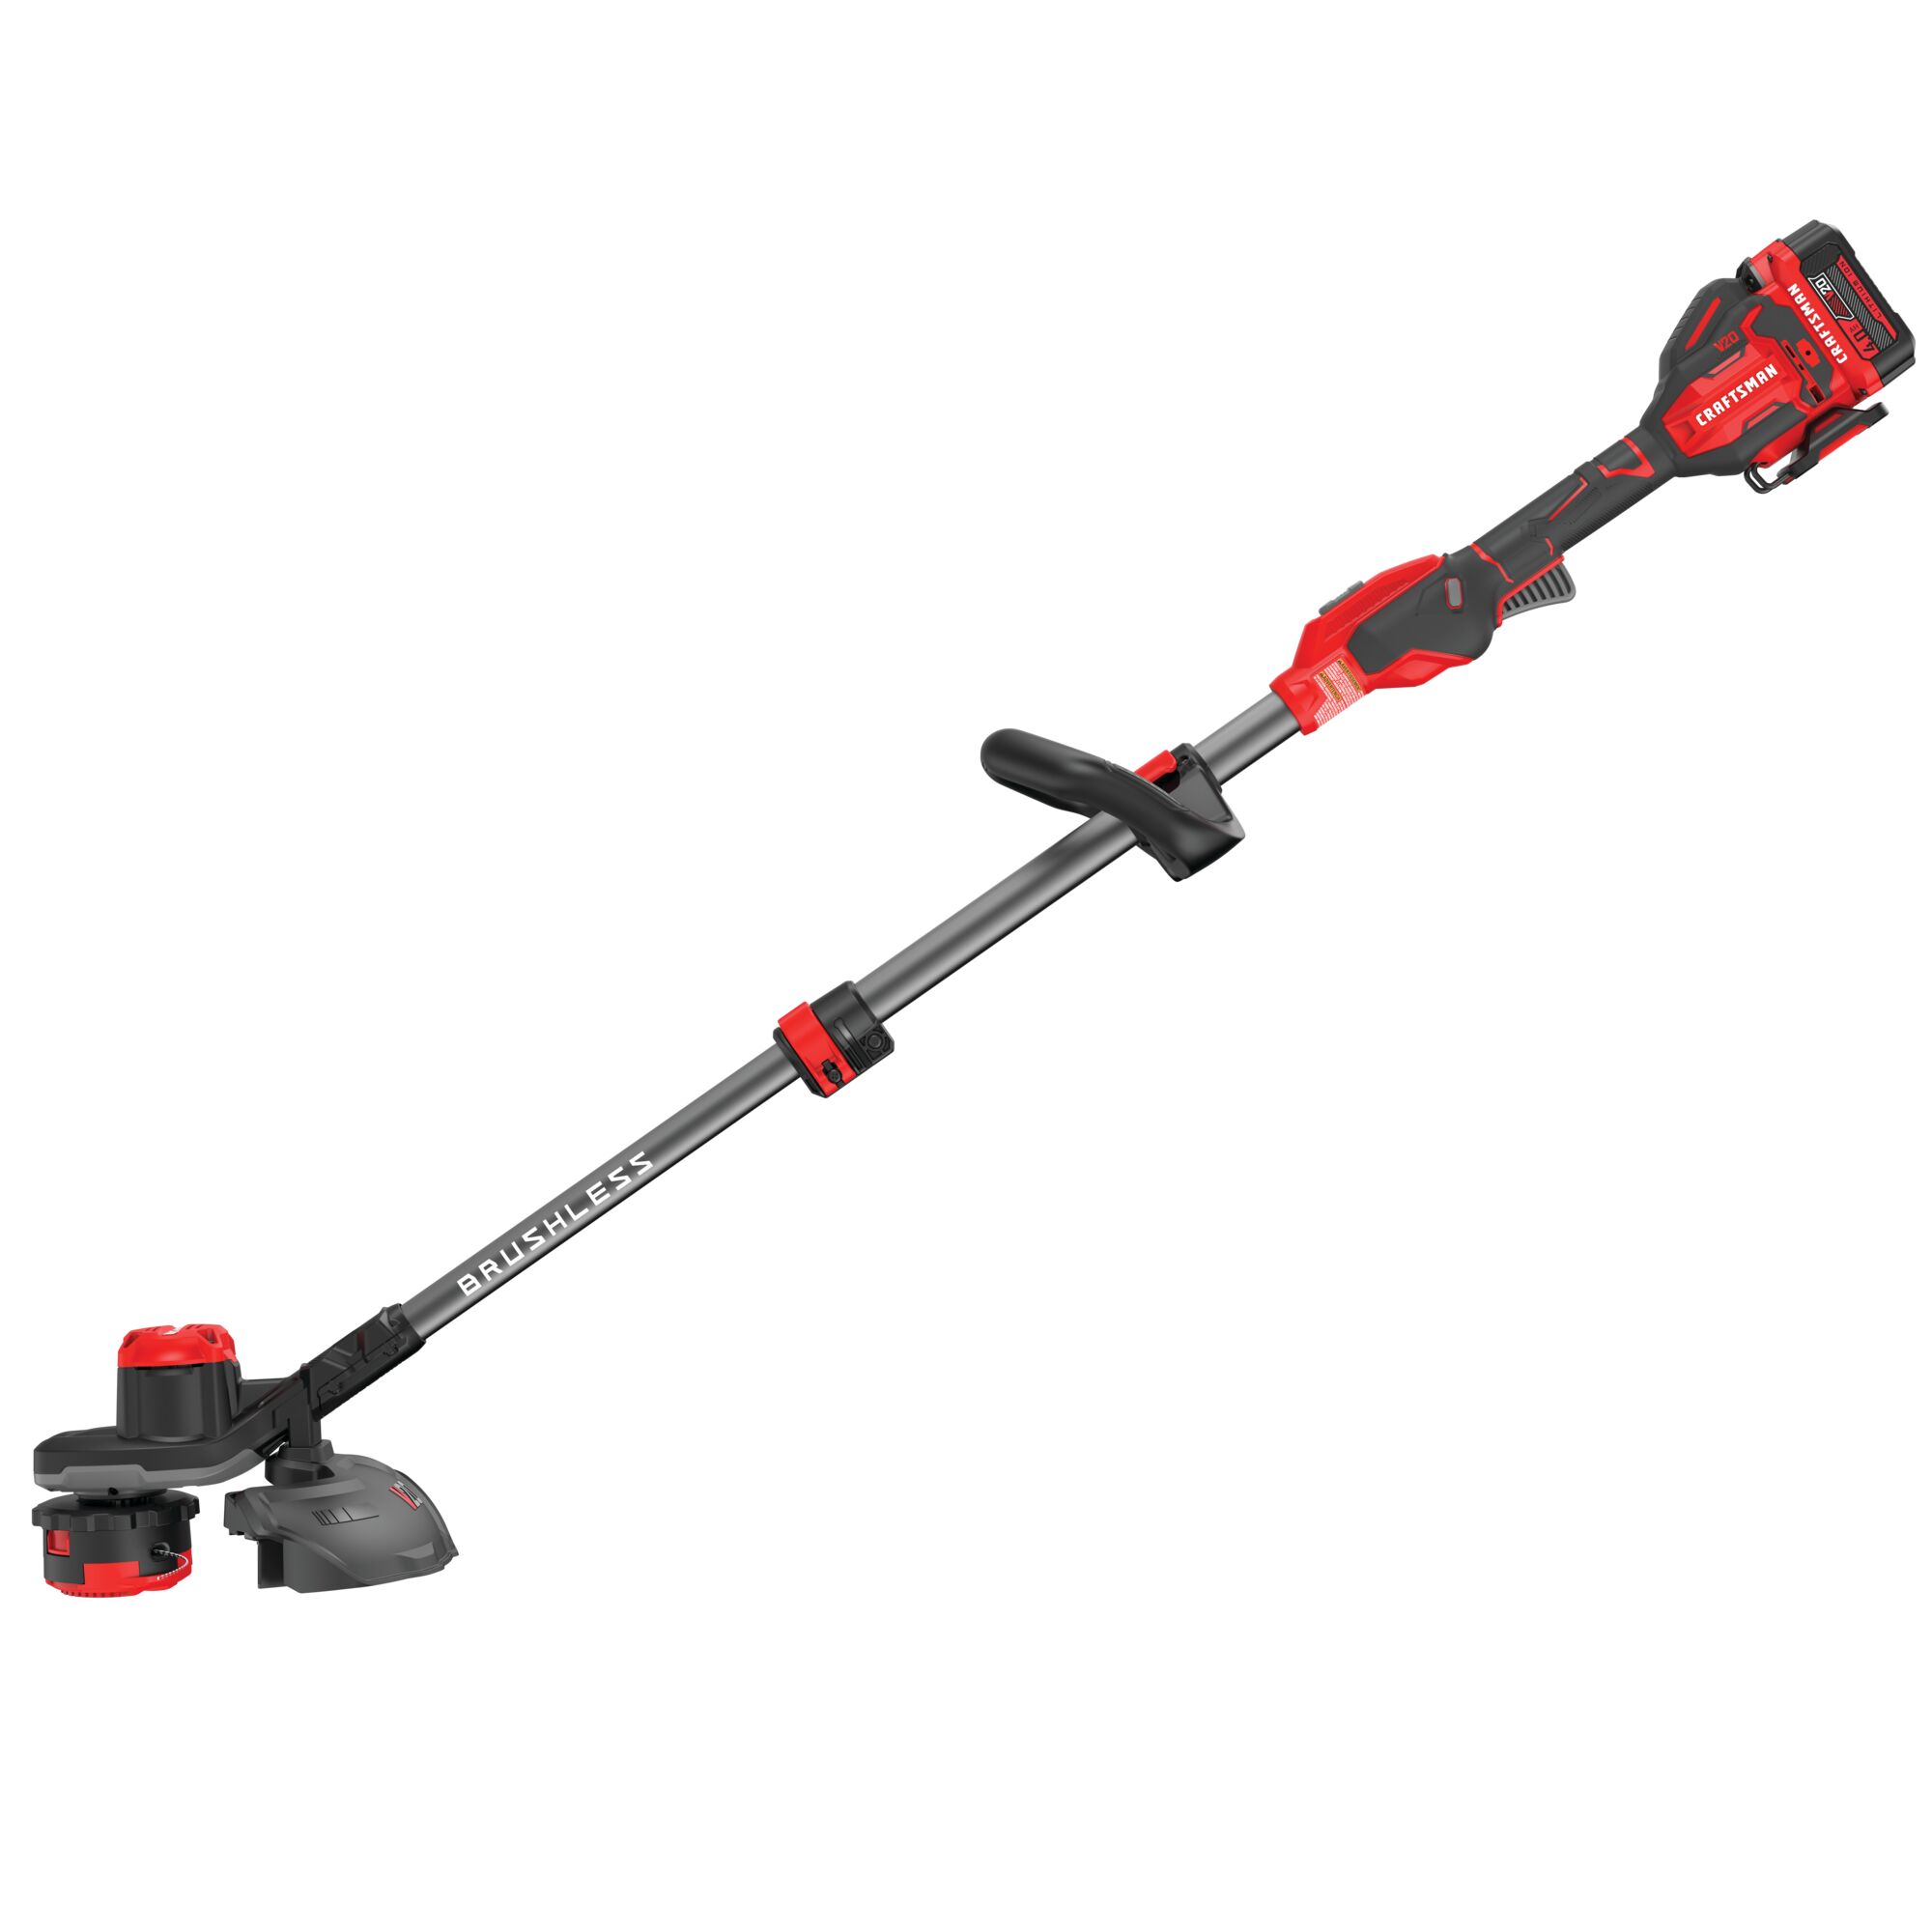 20 volt weedwacker 13 inch brushless cordless string trimmer with quickwind 4.0 ampere per hour.